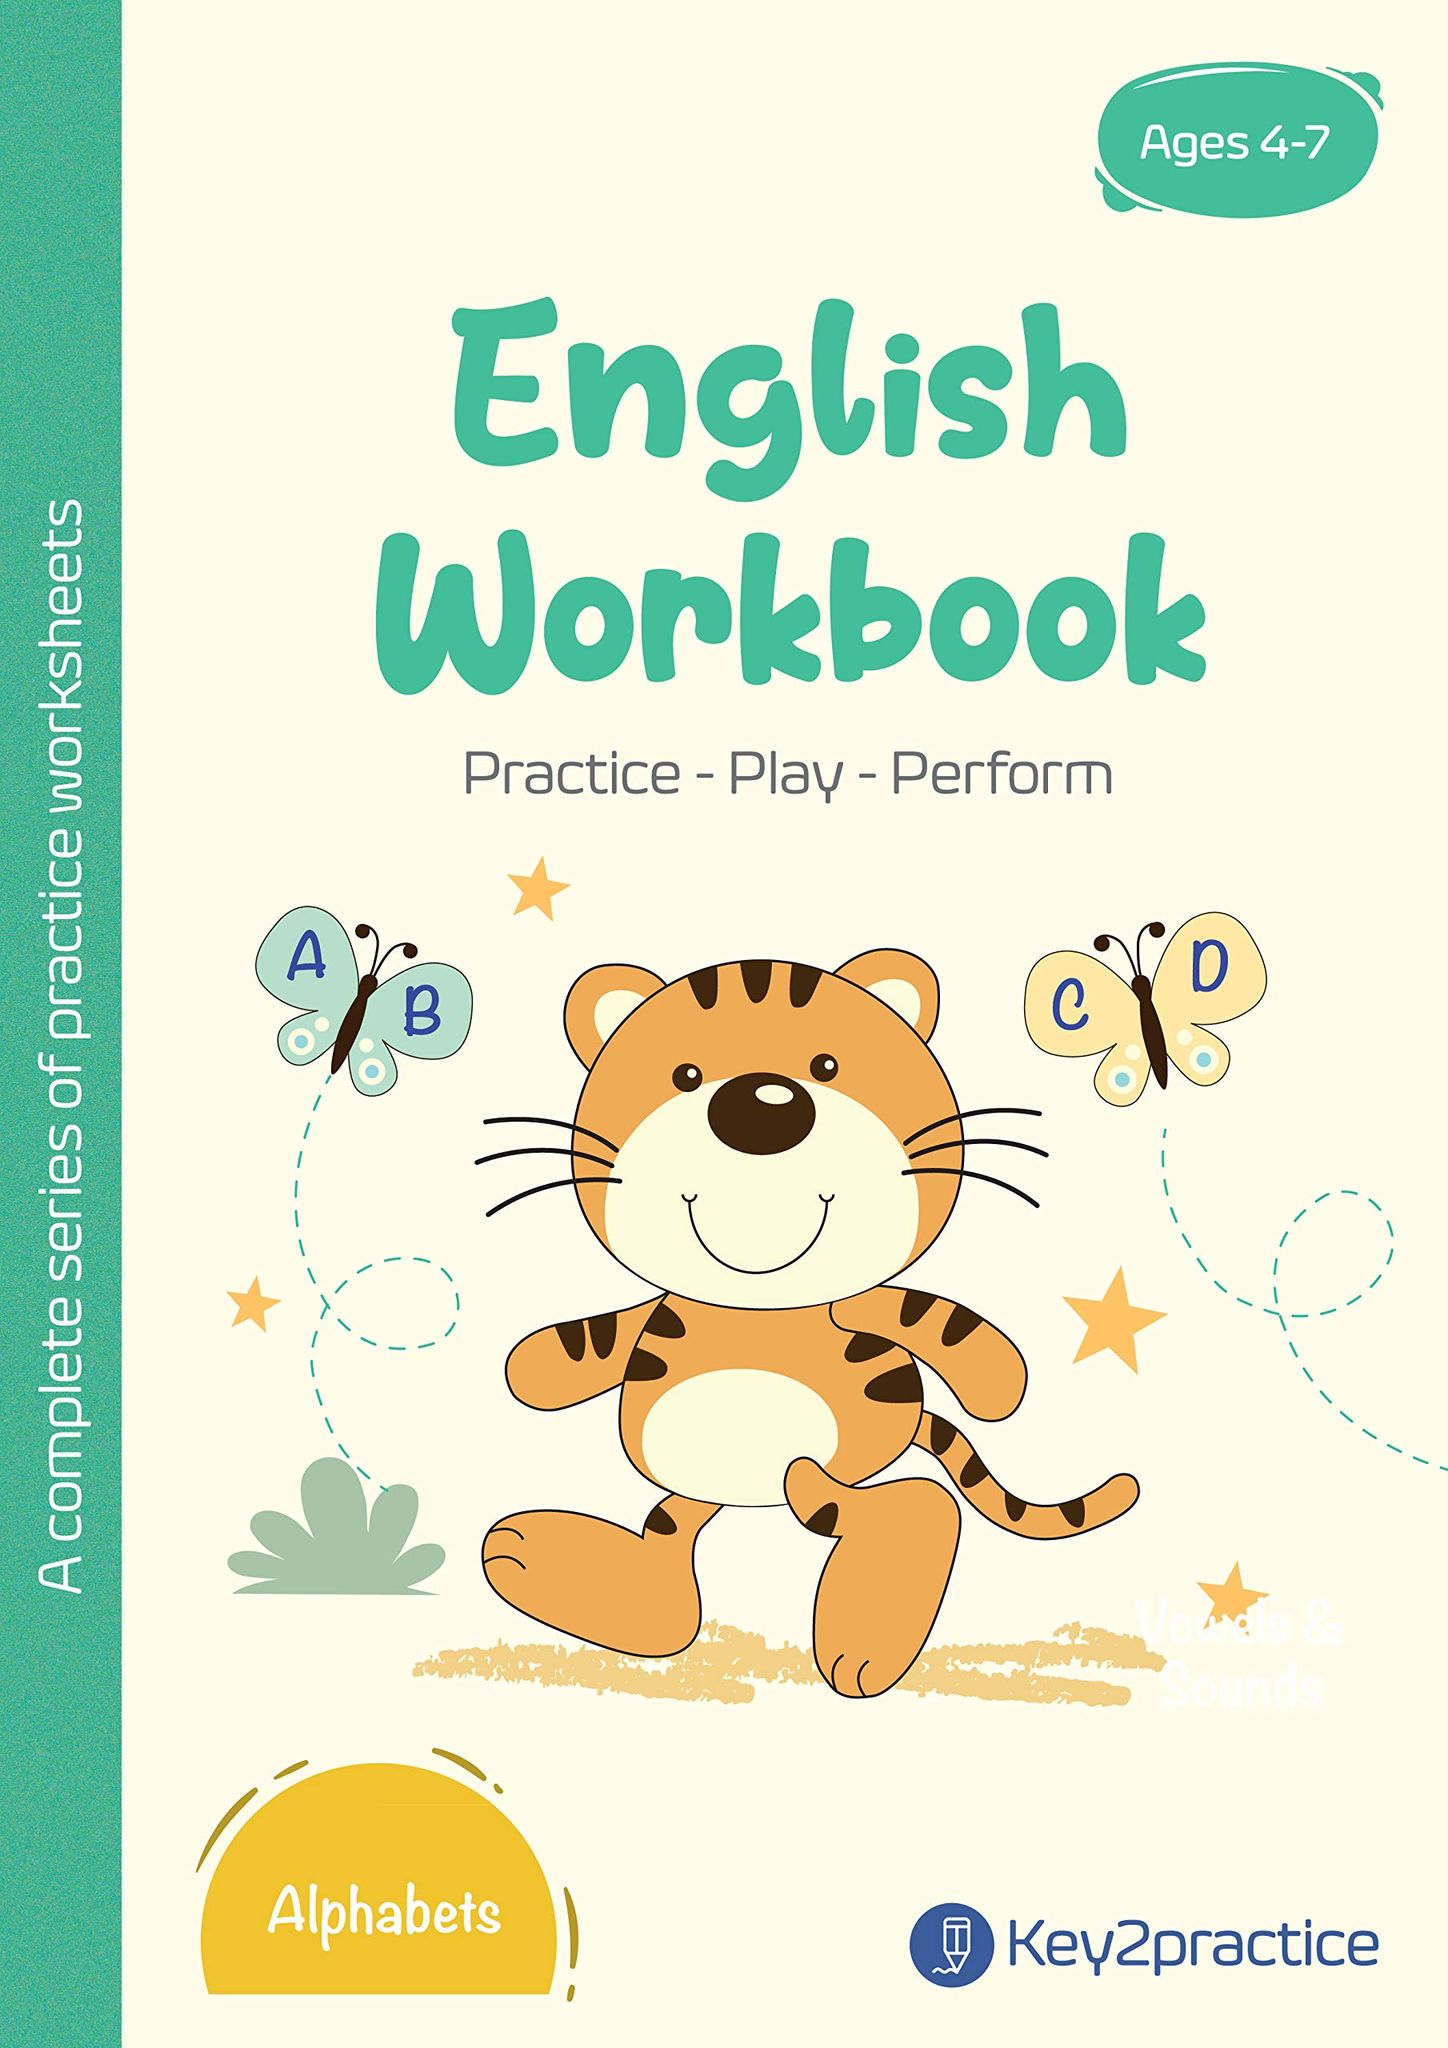 Key2practice Pre Primary (Ages 4-7 yrs) English Grammar Workbook | Topic - The Alphabets | 109 Colourful Practice Worksheets with Answers | Designed by IITians